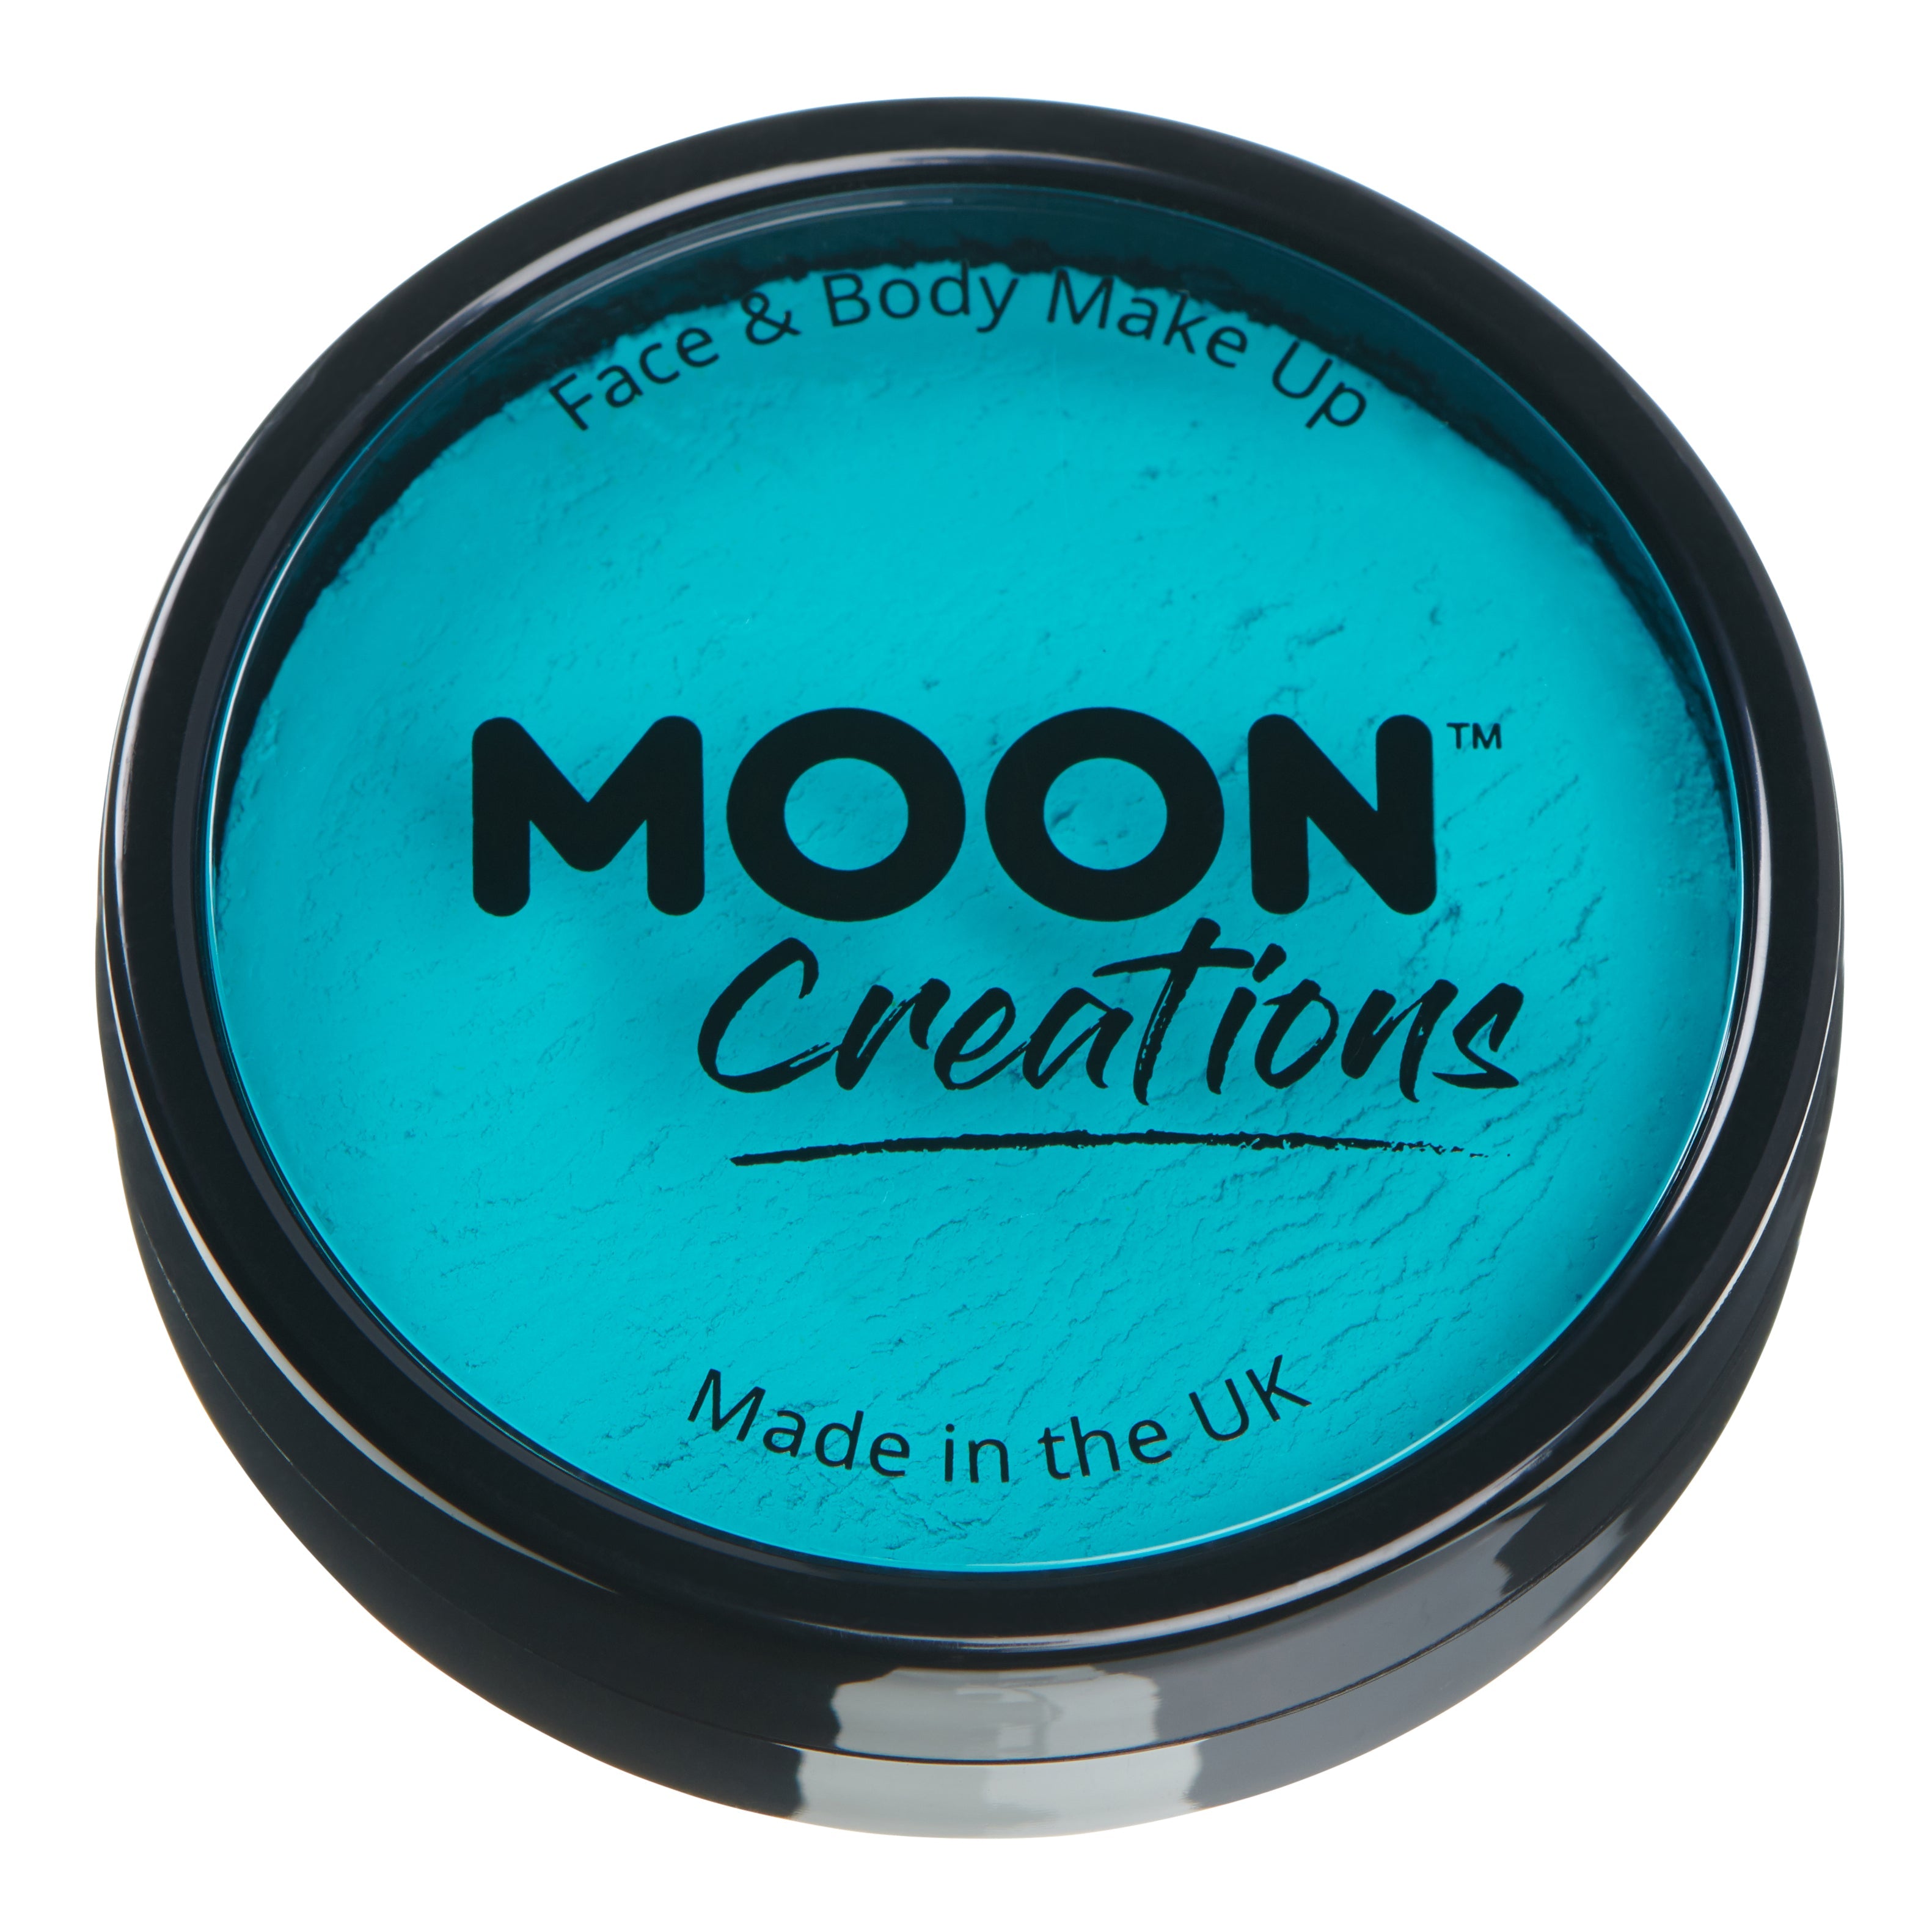 Turquoise - Professional Face Paint, 36g. Cosmetically certified, FDA & Health Canada compliant, cruelty free and vegan.